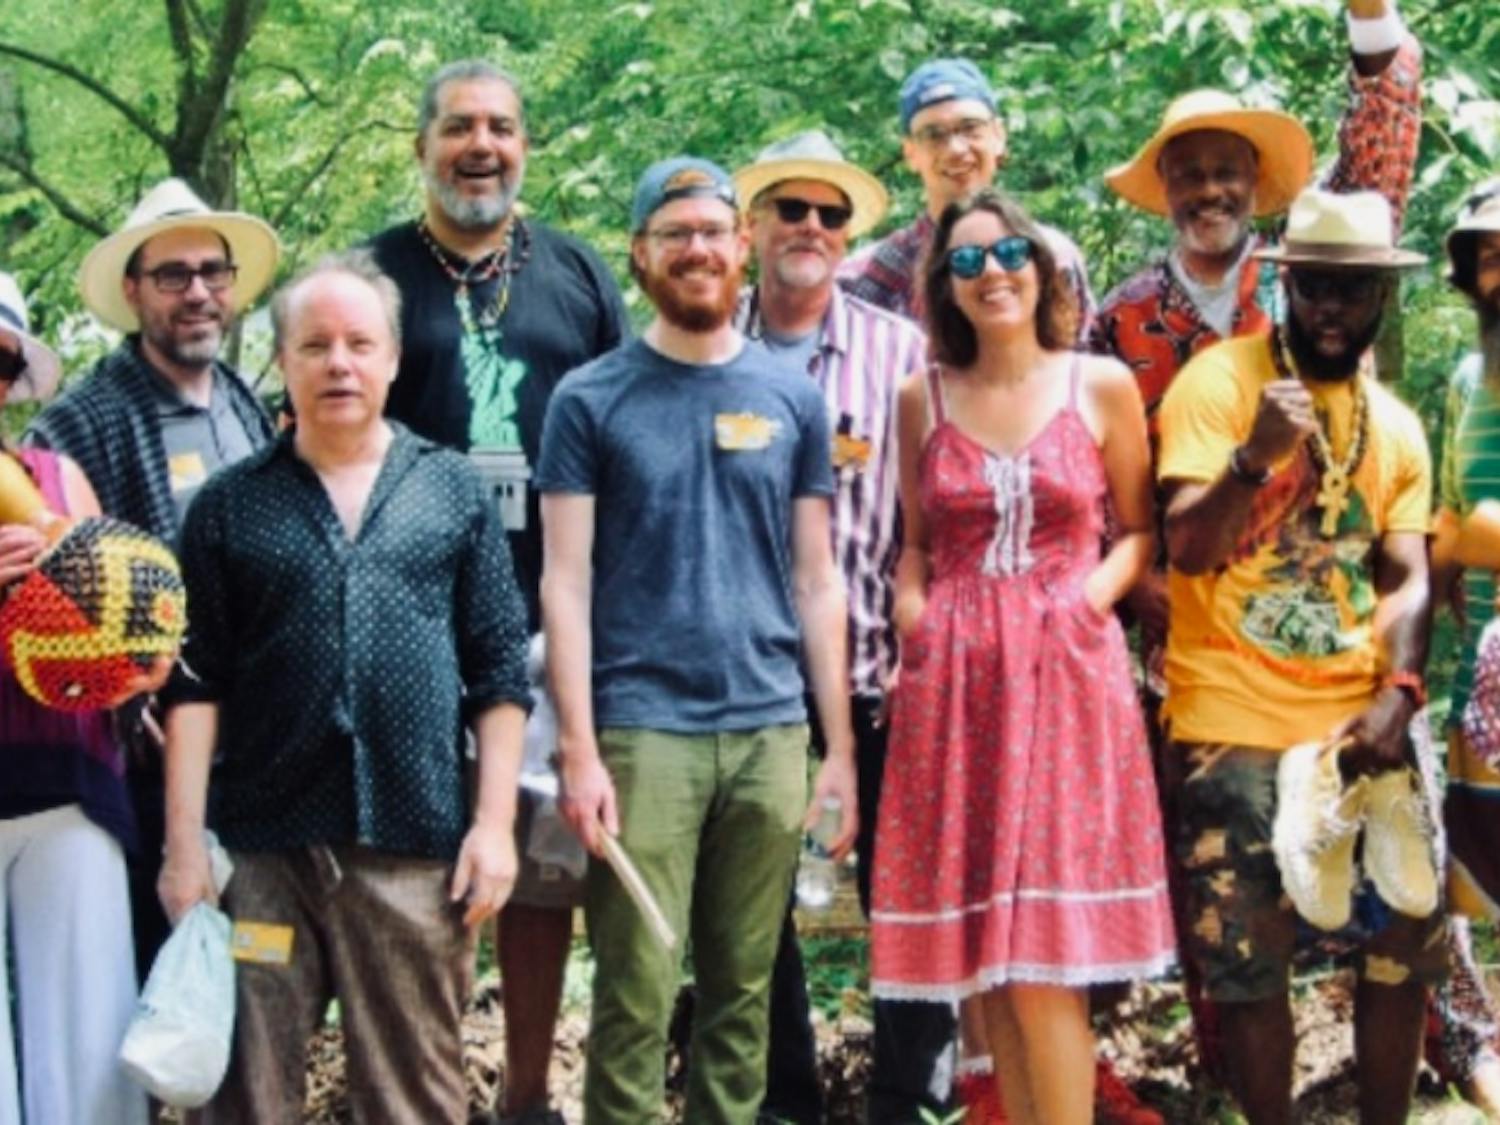 Triangle Afrobeat Orchestra will be collaborating with Paperhand Puppet Intervention to celebrate the arts and fundraise for public school arts programs. Photo courtesy of Labarrian Jones.